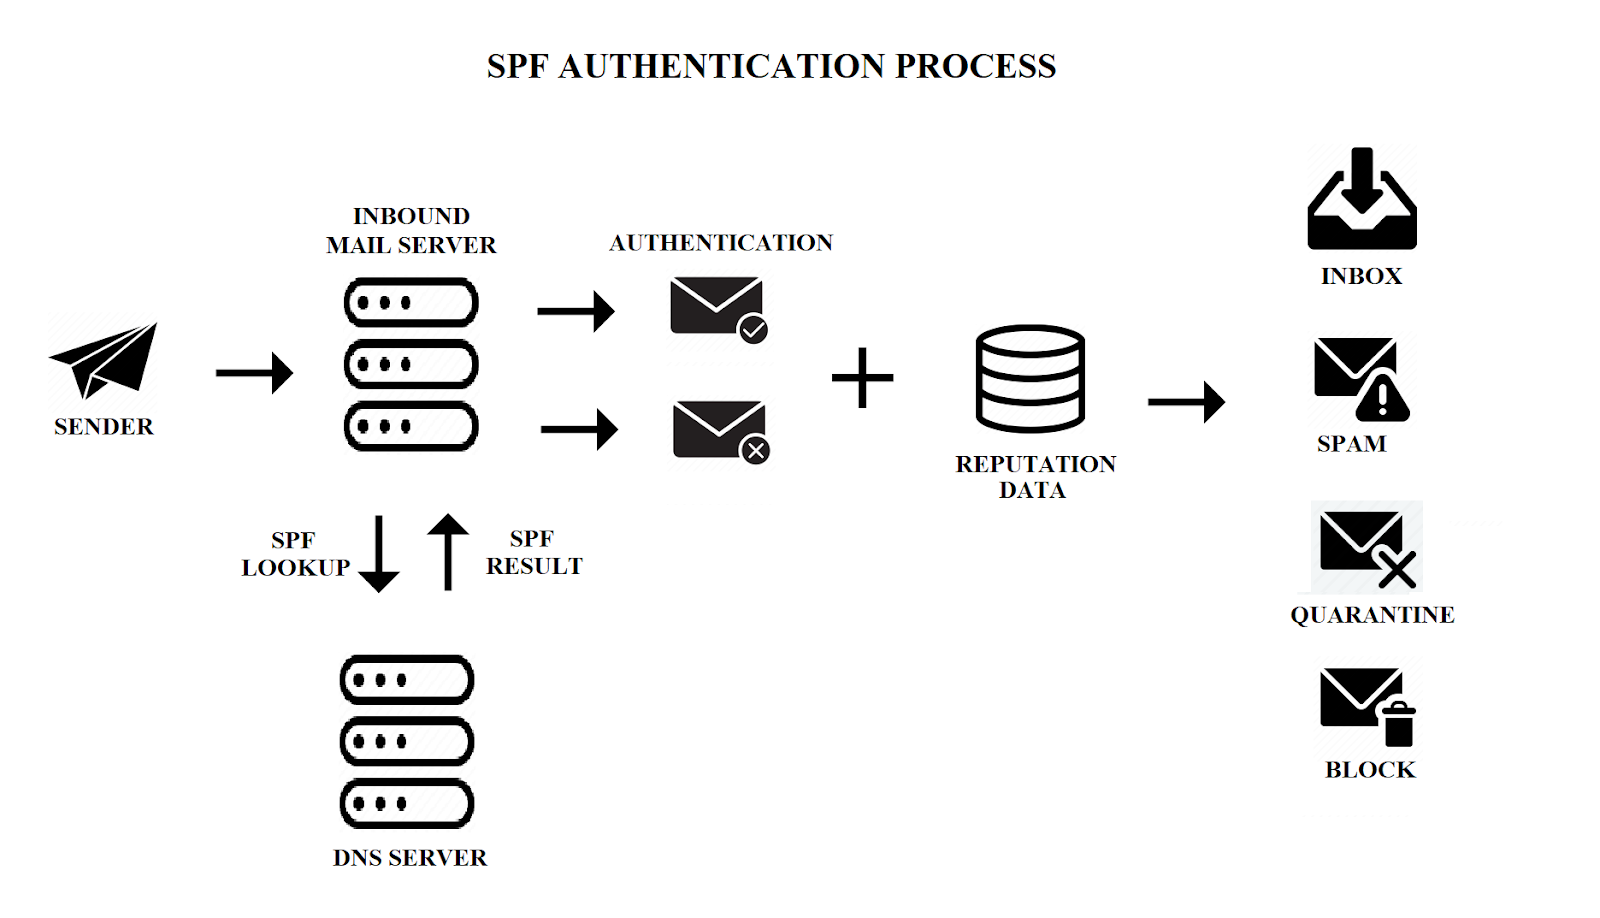 Improve your email security: SPF, DKIM and DMARC